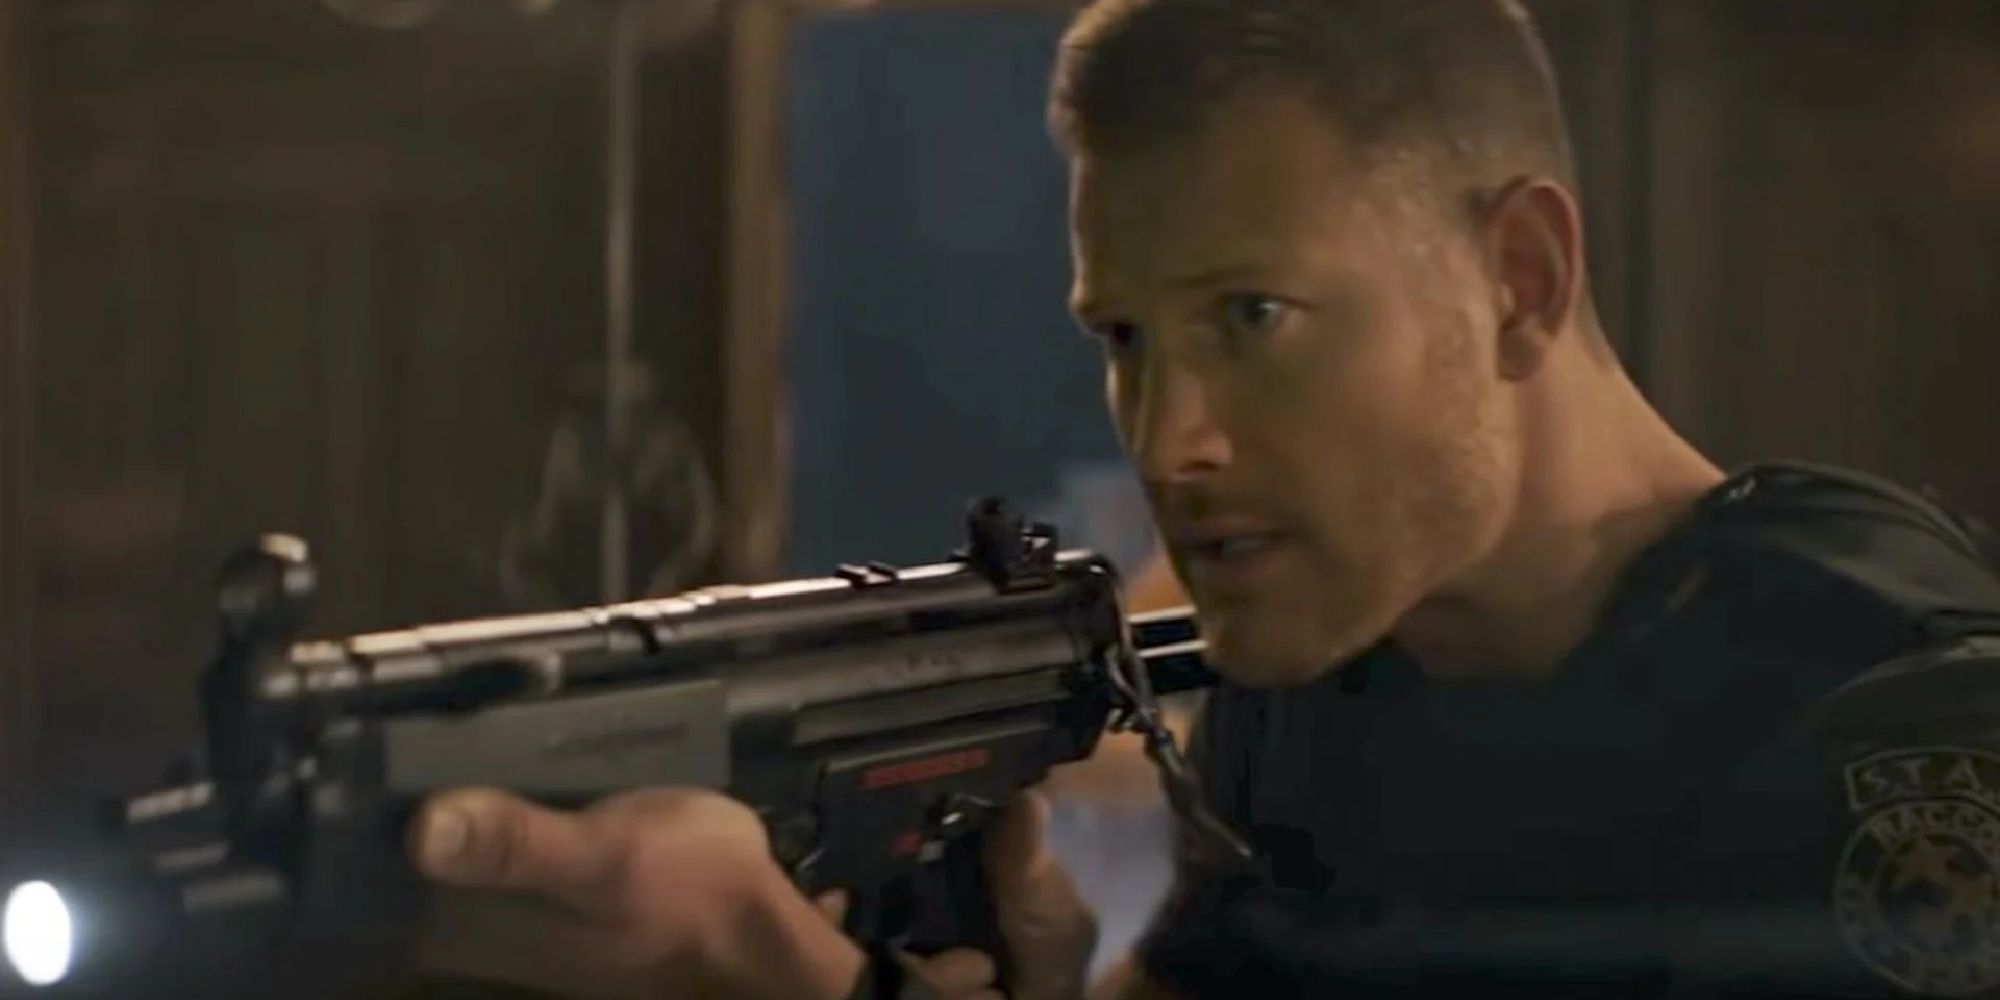 Wesker as seen in the movie, levelling a rifle at an unseen opponent.